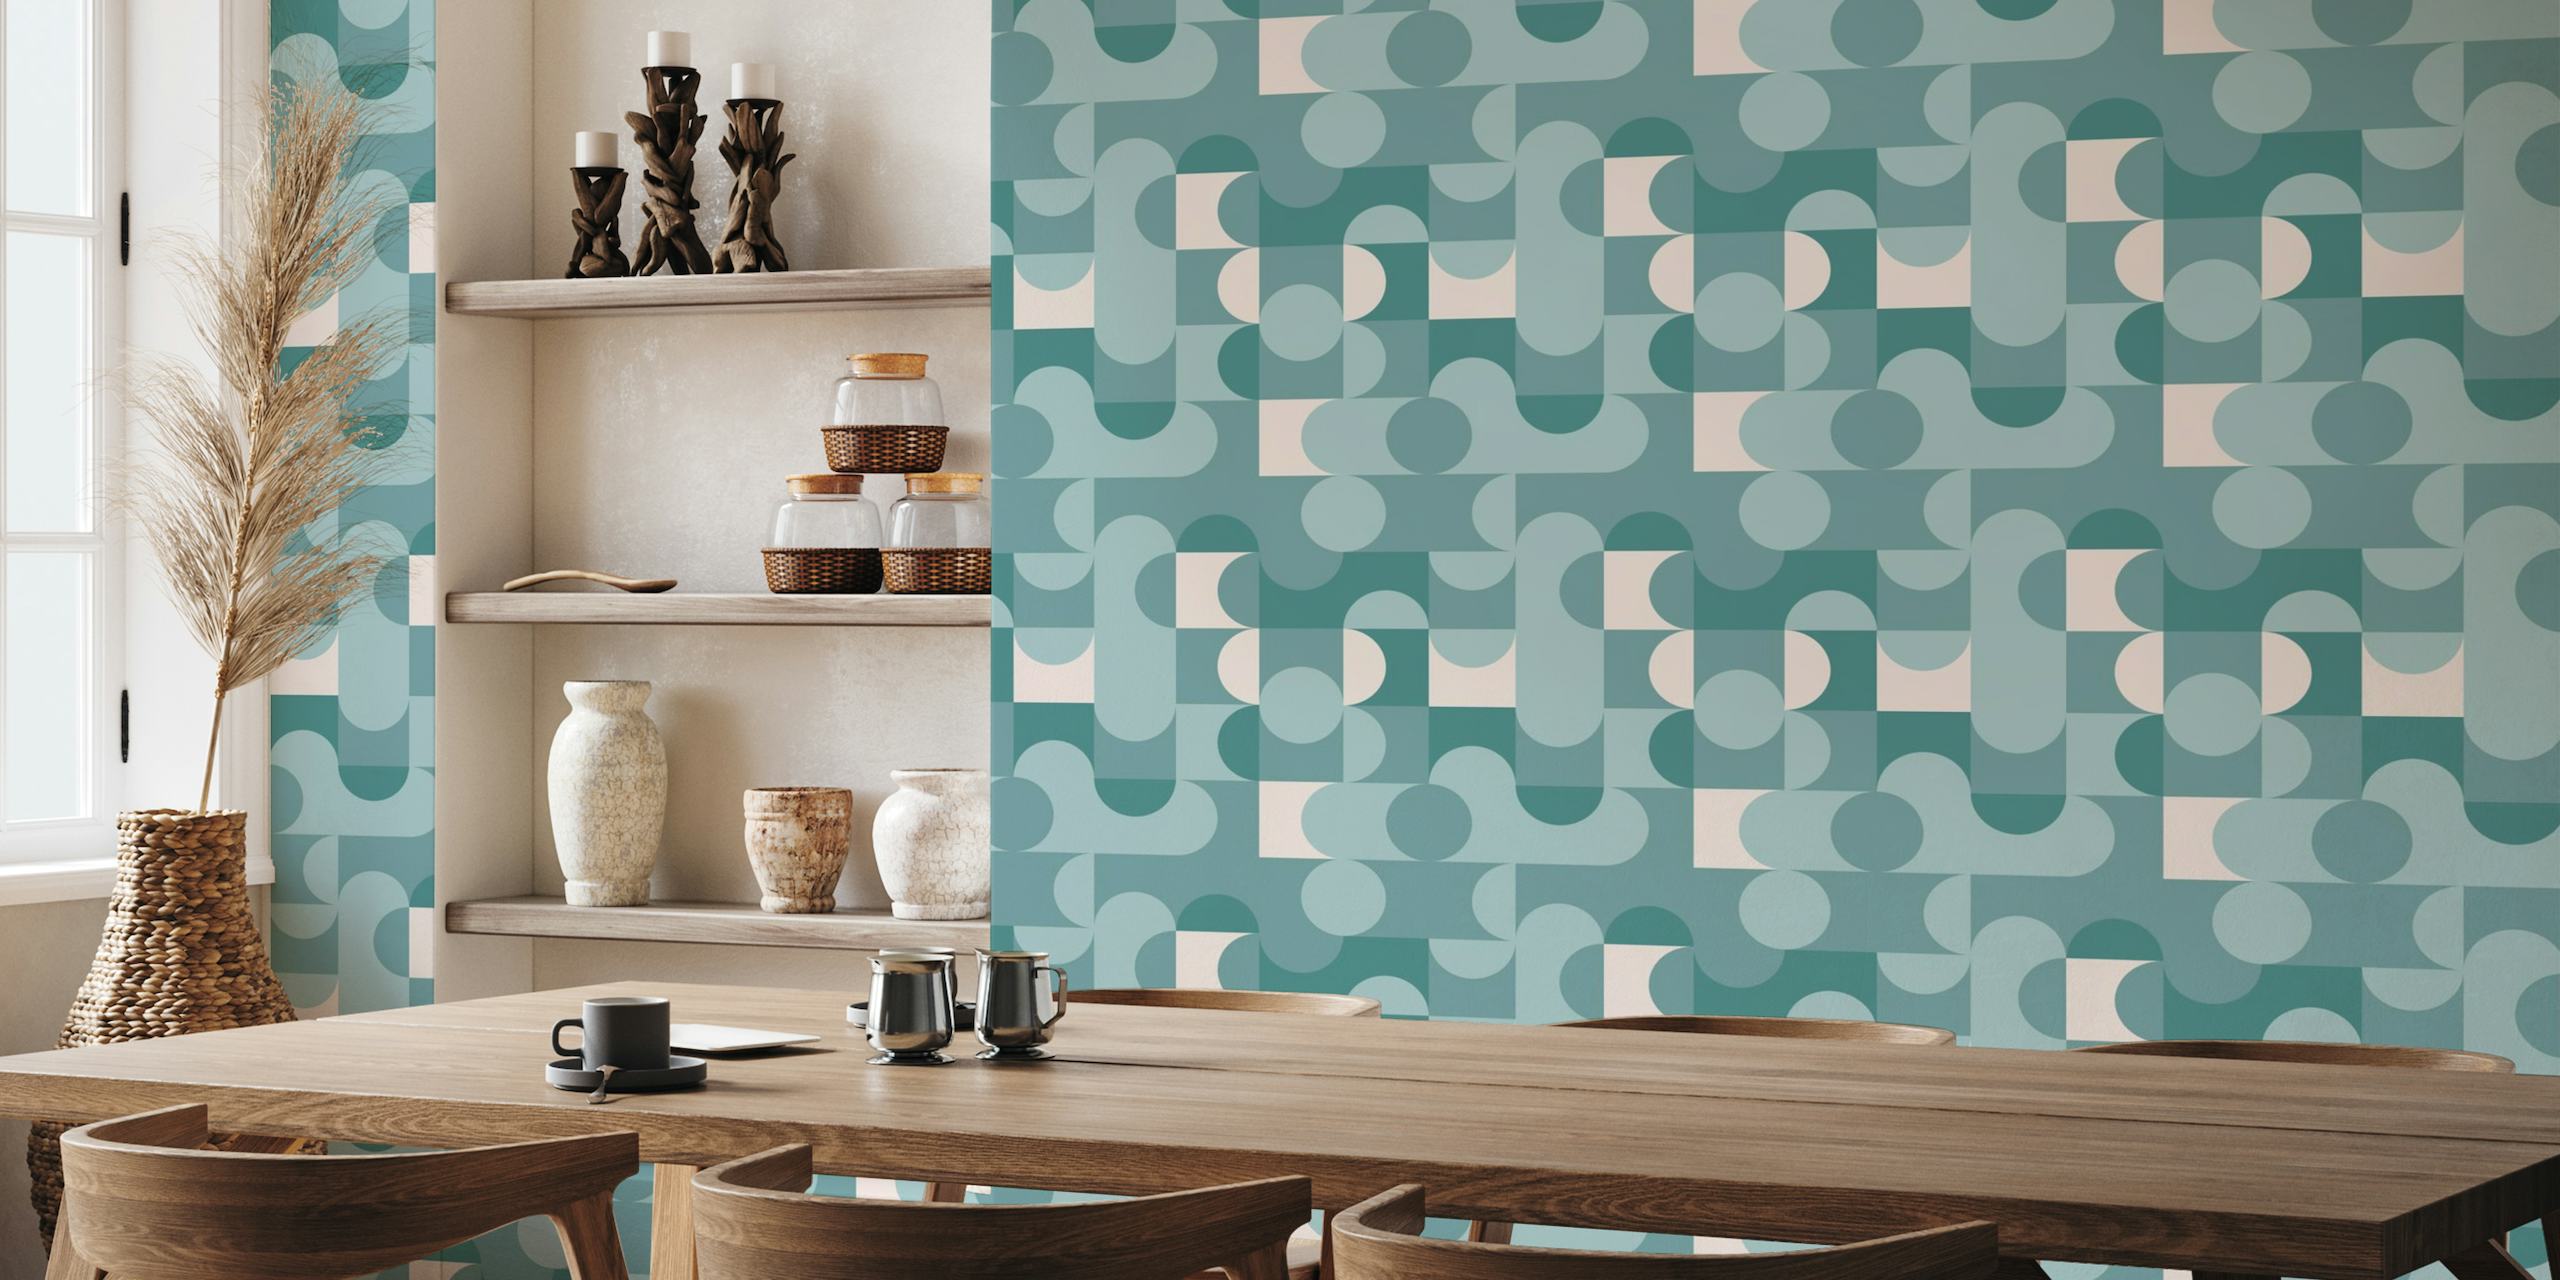 Geometric Retro Shapes Pattern Wall Mural in Teal and Beige